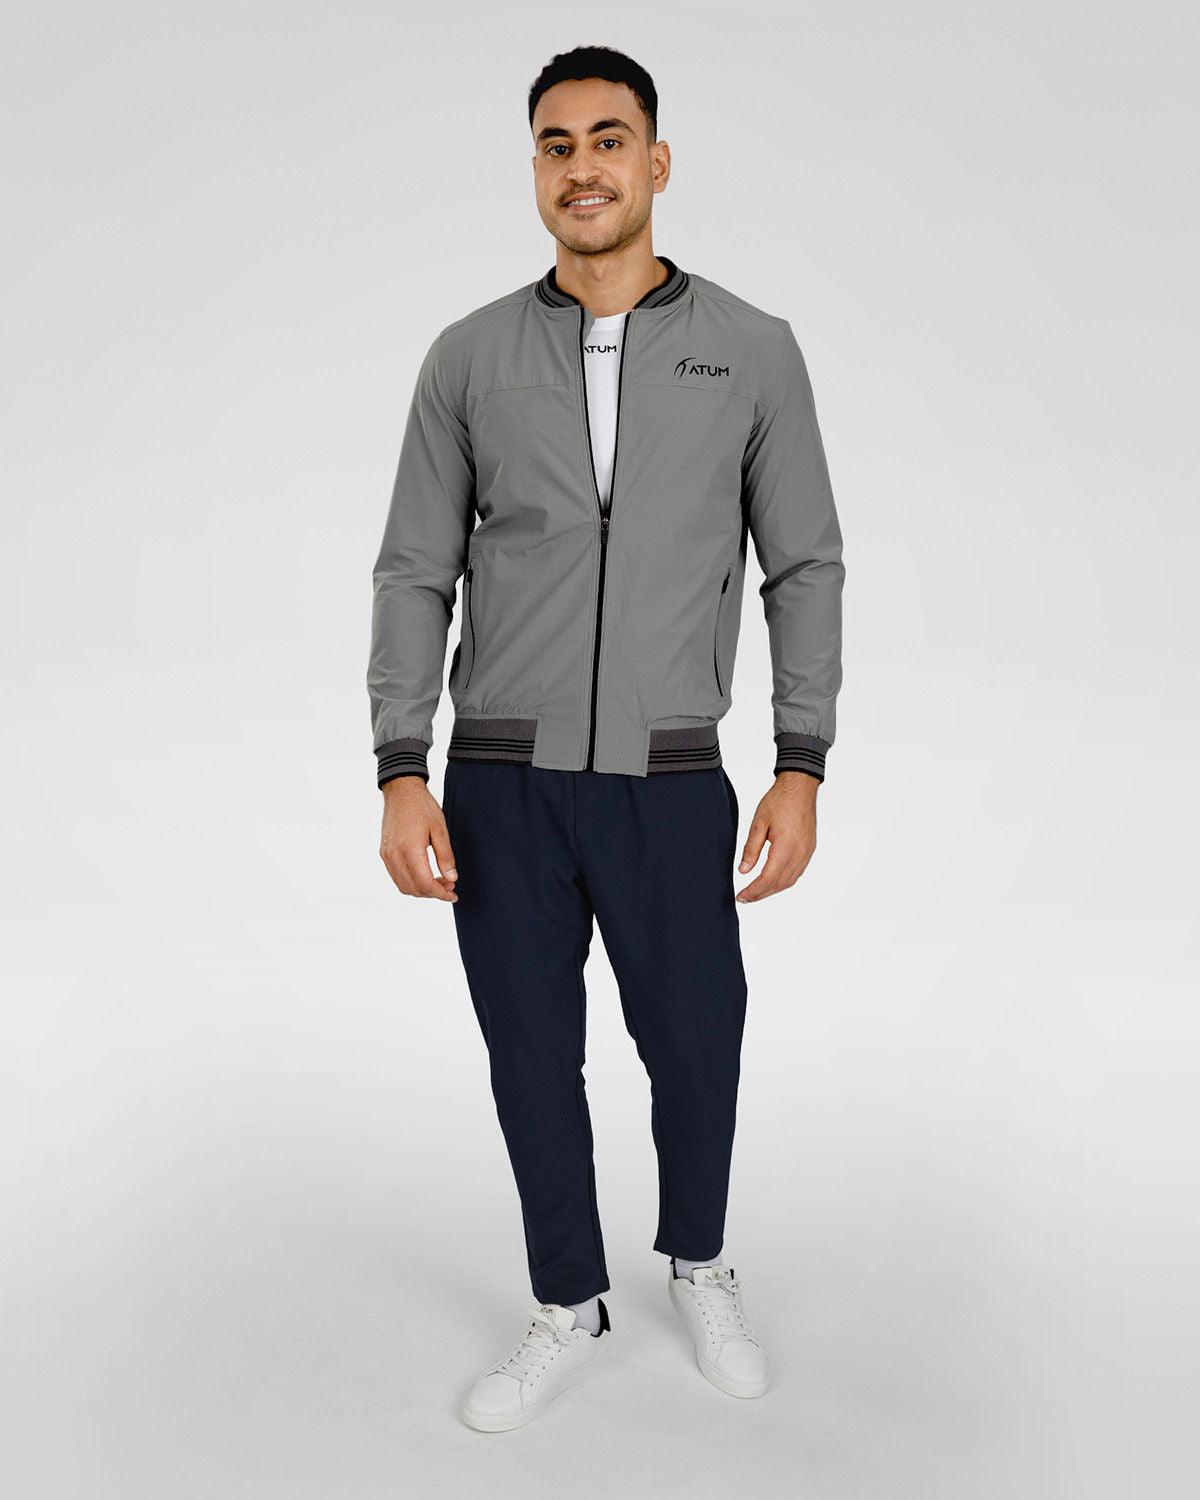 Photo by 𝗔𝗧𝗨ð�— SPORTSWEAR ® on December 20, 2022. May be an image of 1 man wear gray jacket with white basic t-shirt, and navy sweatpants with white shoes.